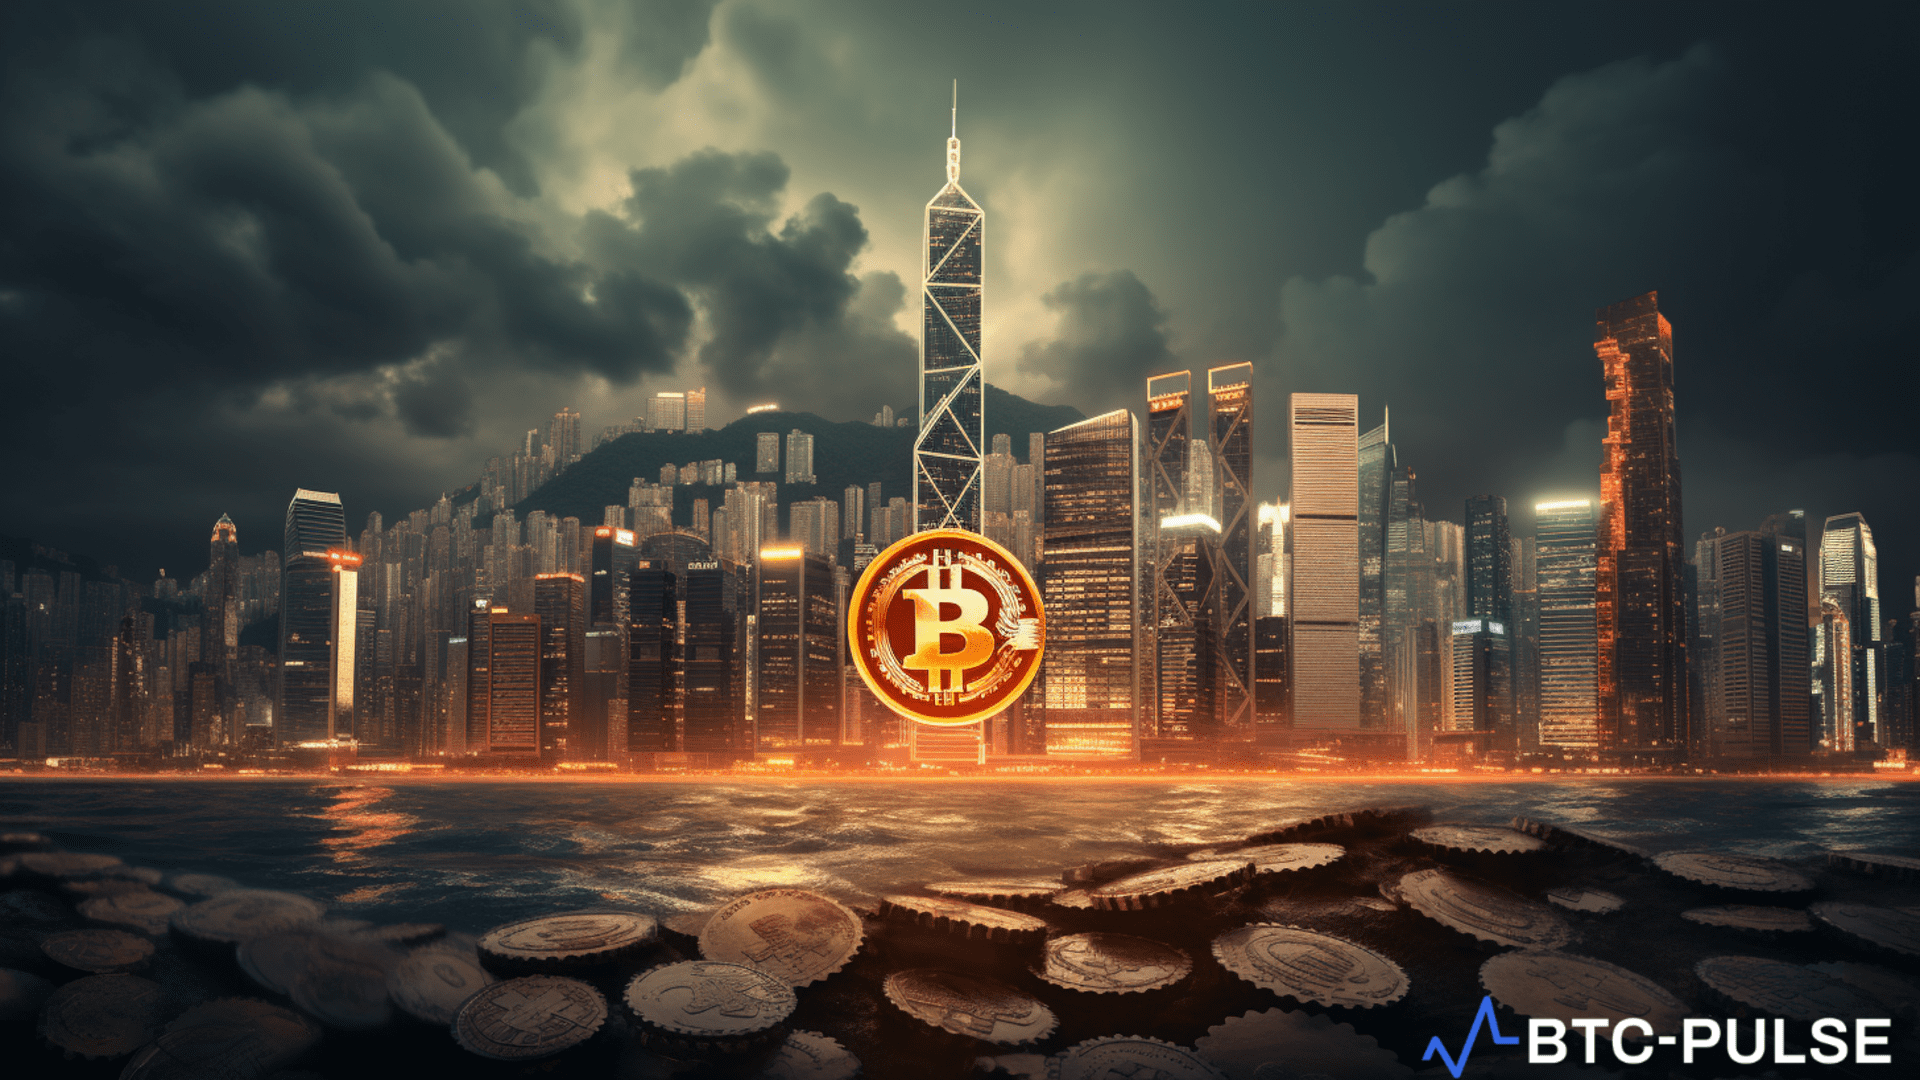 Hong Kong’s Market Regulator Issues Warning Against Crypto Exchange Bybit Amid Rising Concerns